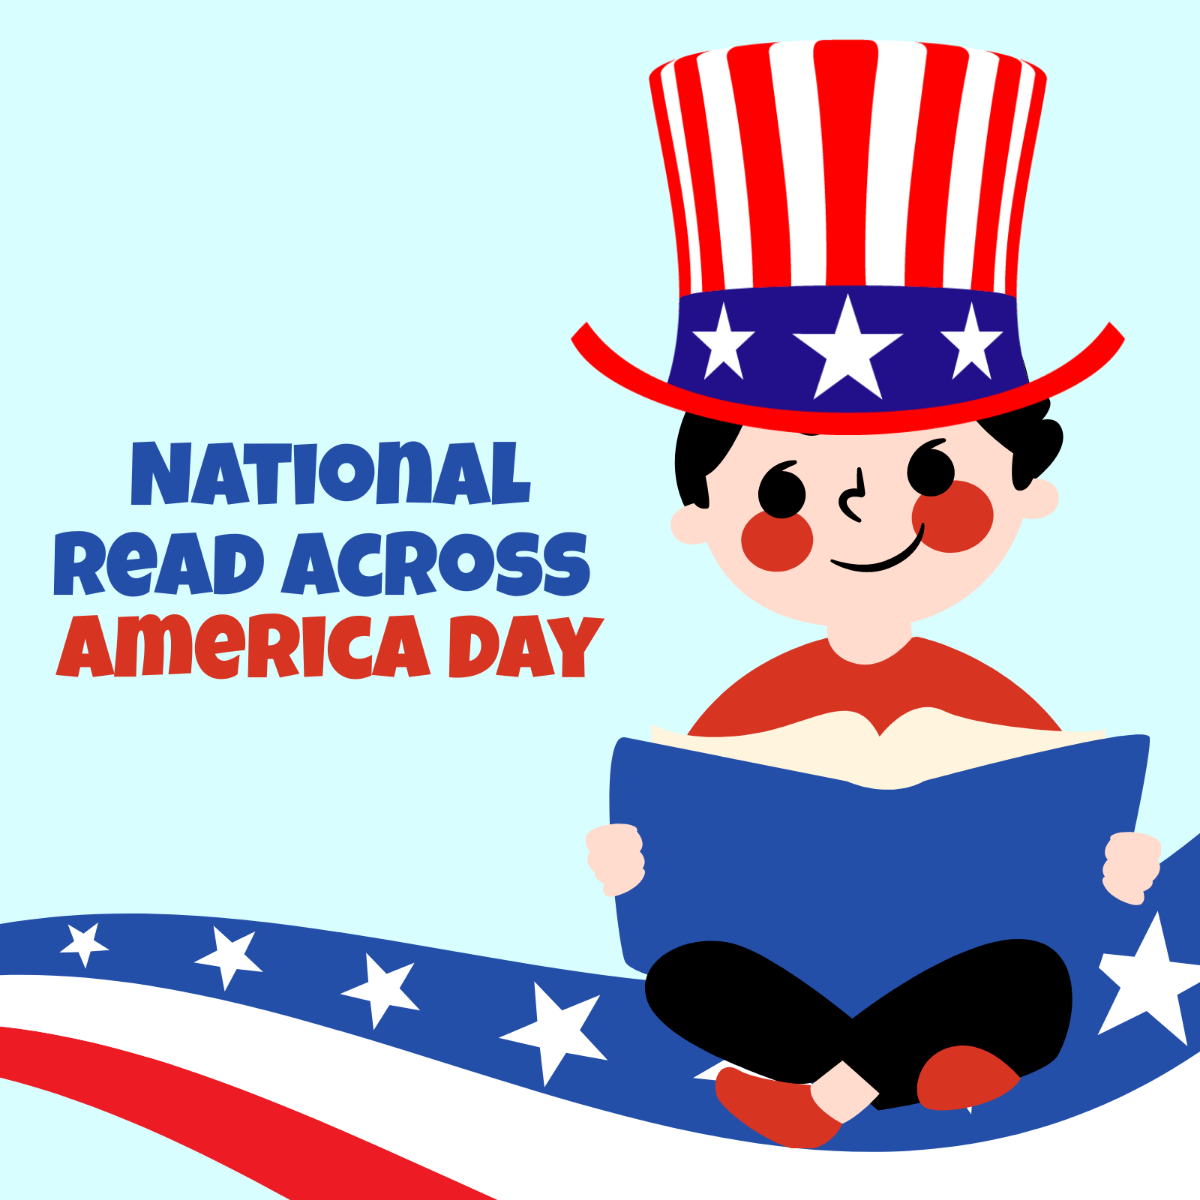 National Read Across America Day Whatsapp Post Template